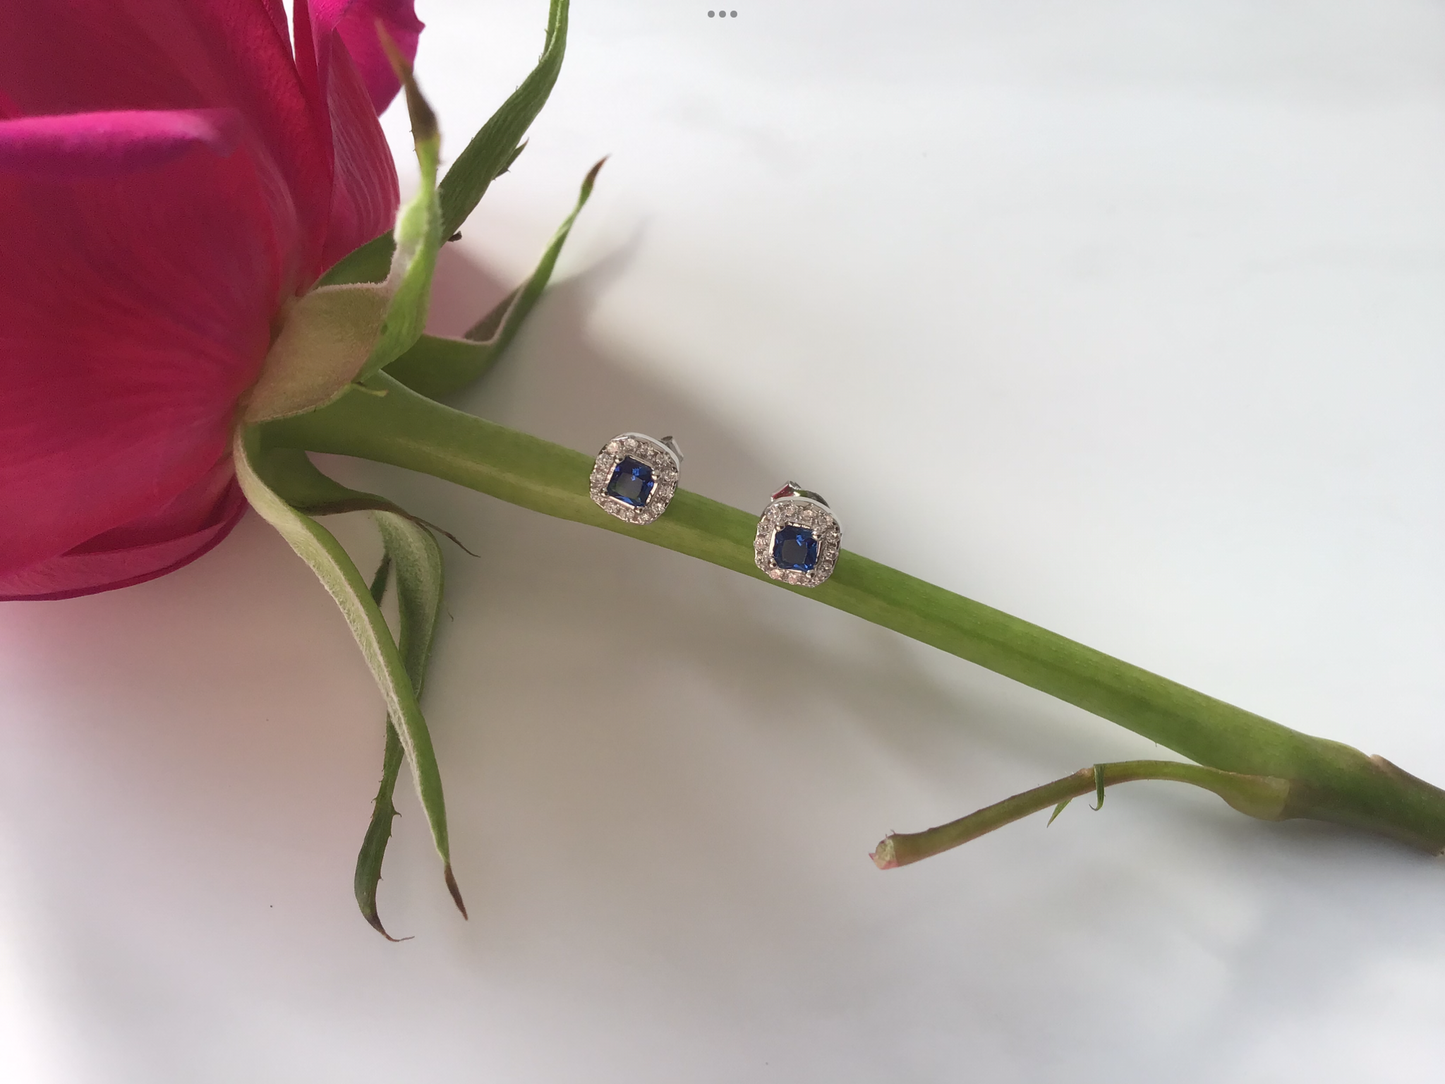 Genuine 925 Sterling Silver Sapphire Square CZ Pair of Stud Earrings, 6mm